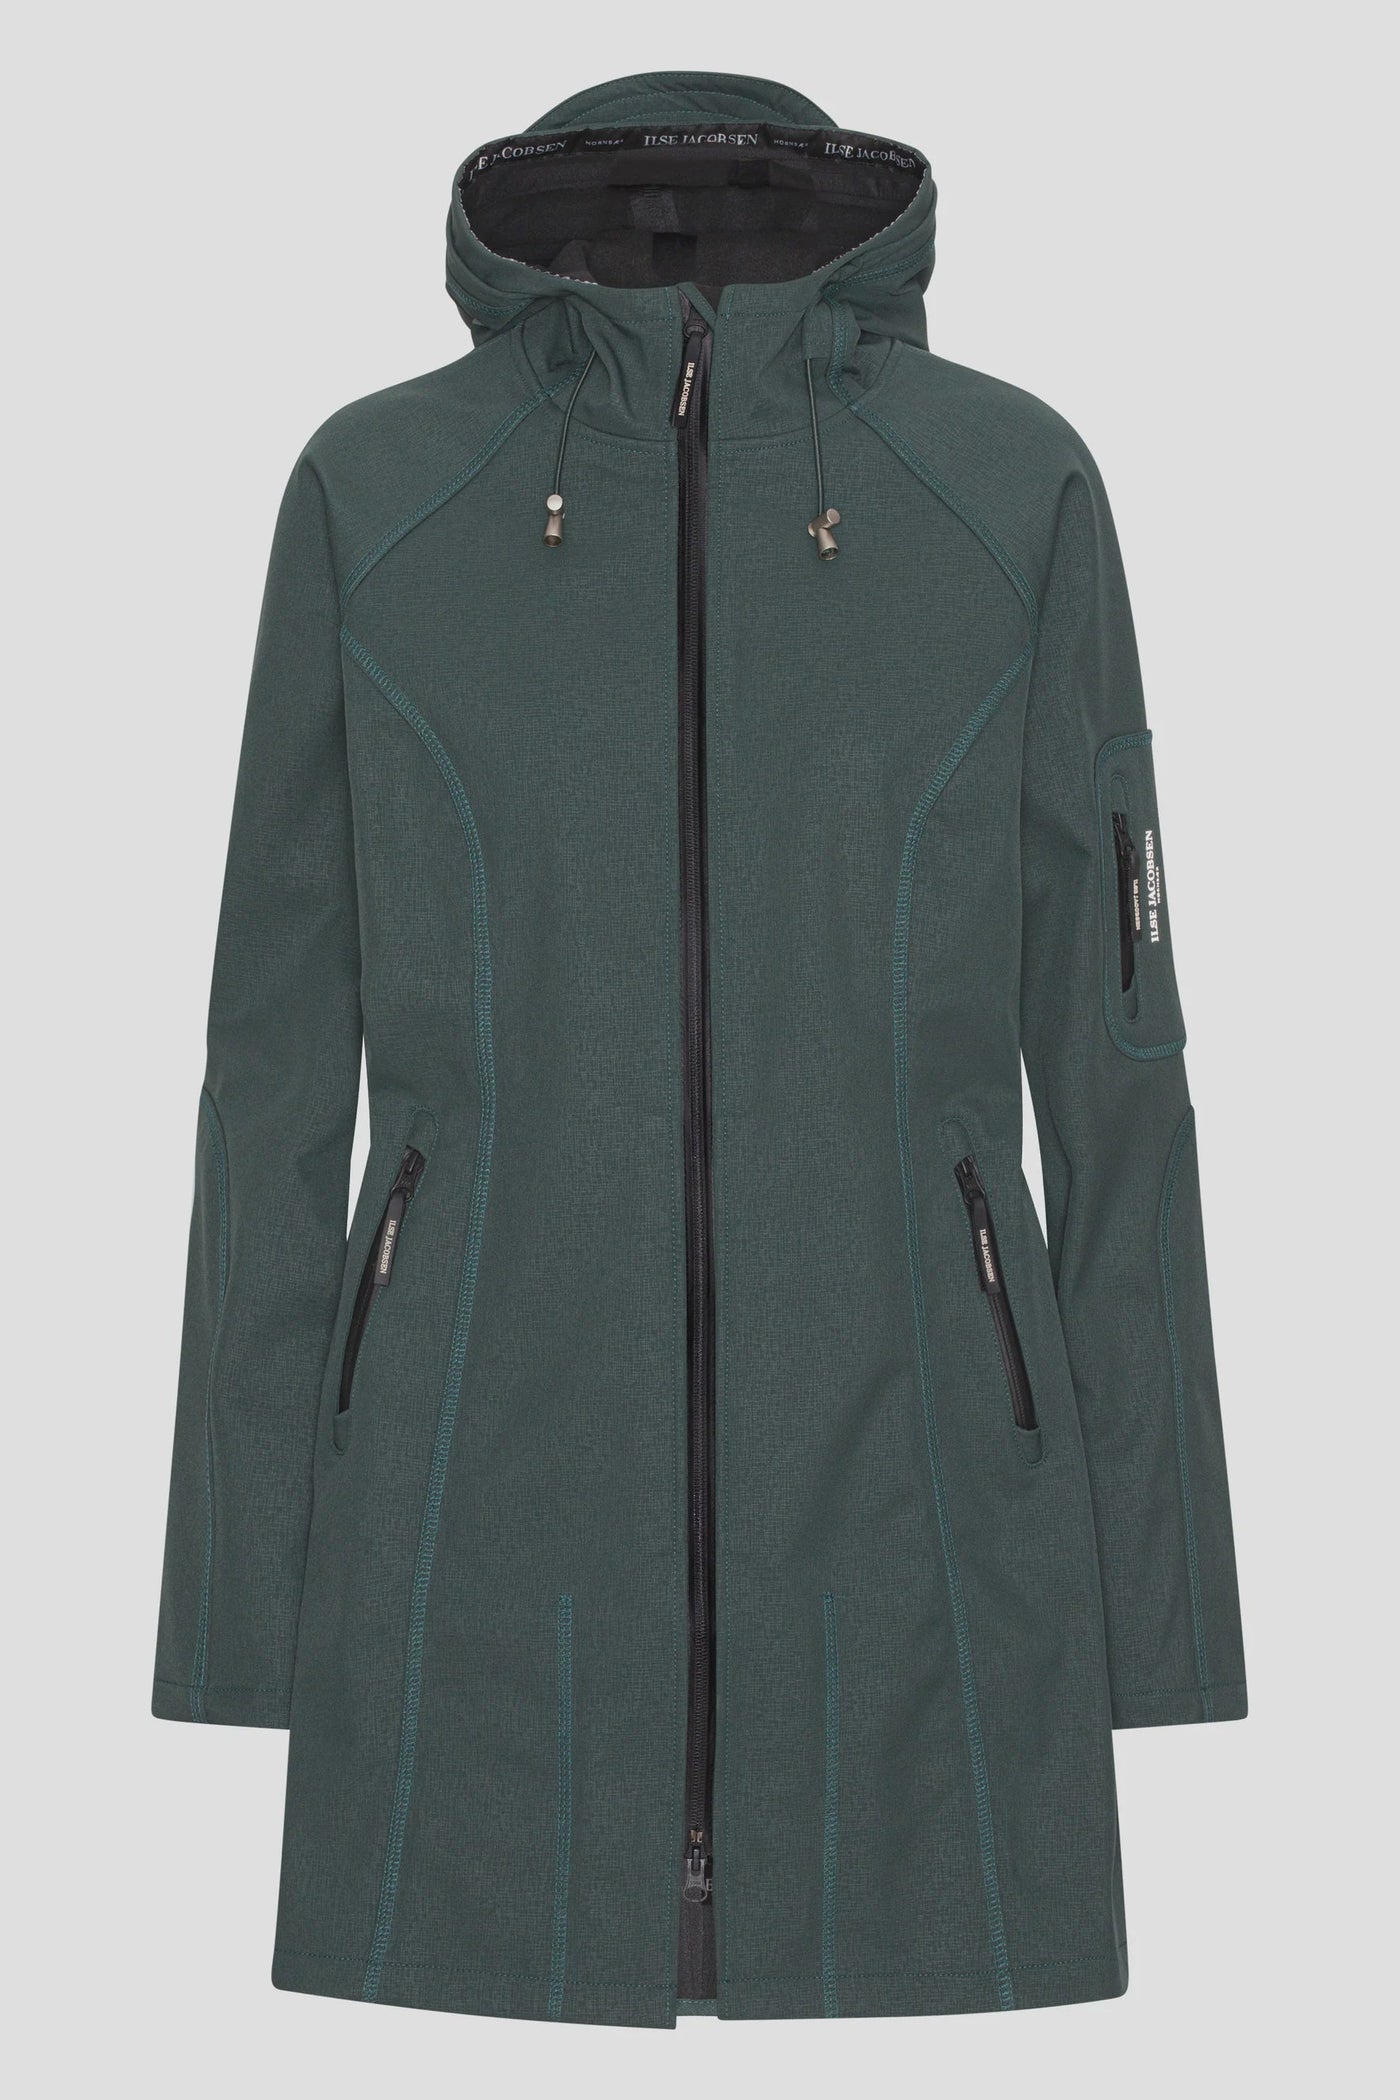 Ilse Jacobsen Rain37 in Beetle-Womens-Ohh! By Gum - Shop Sustainable